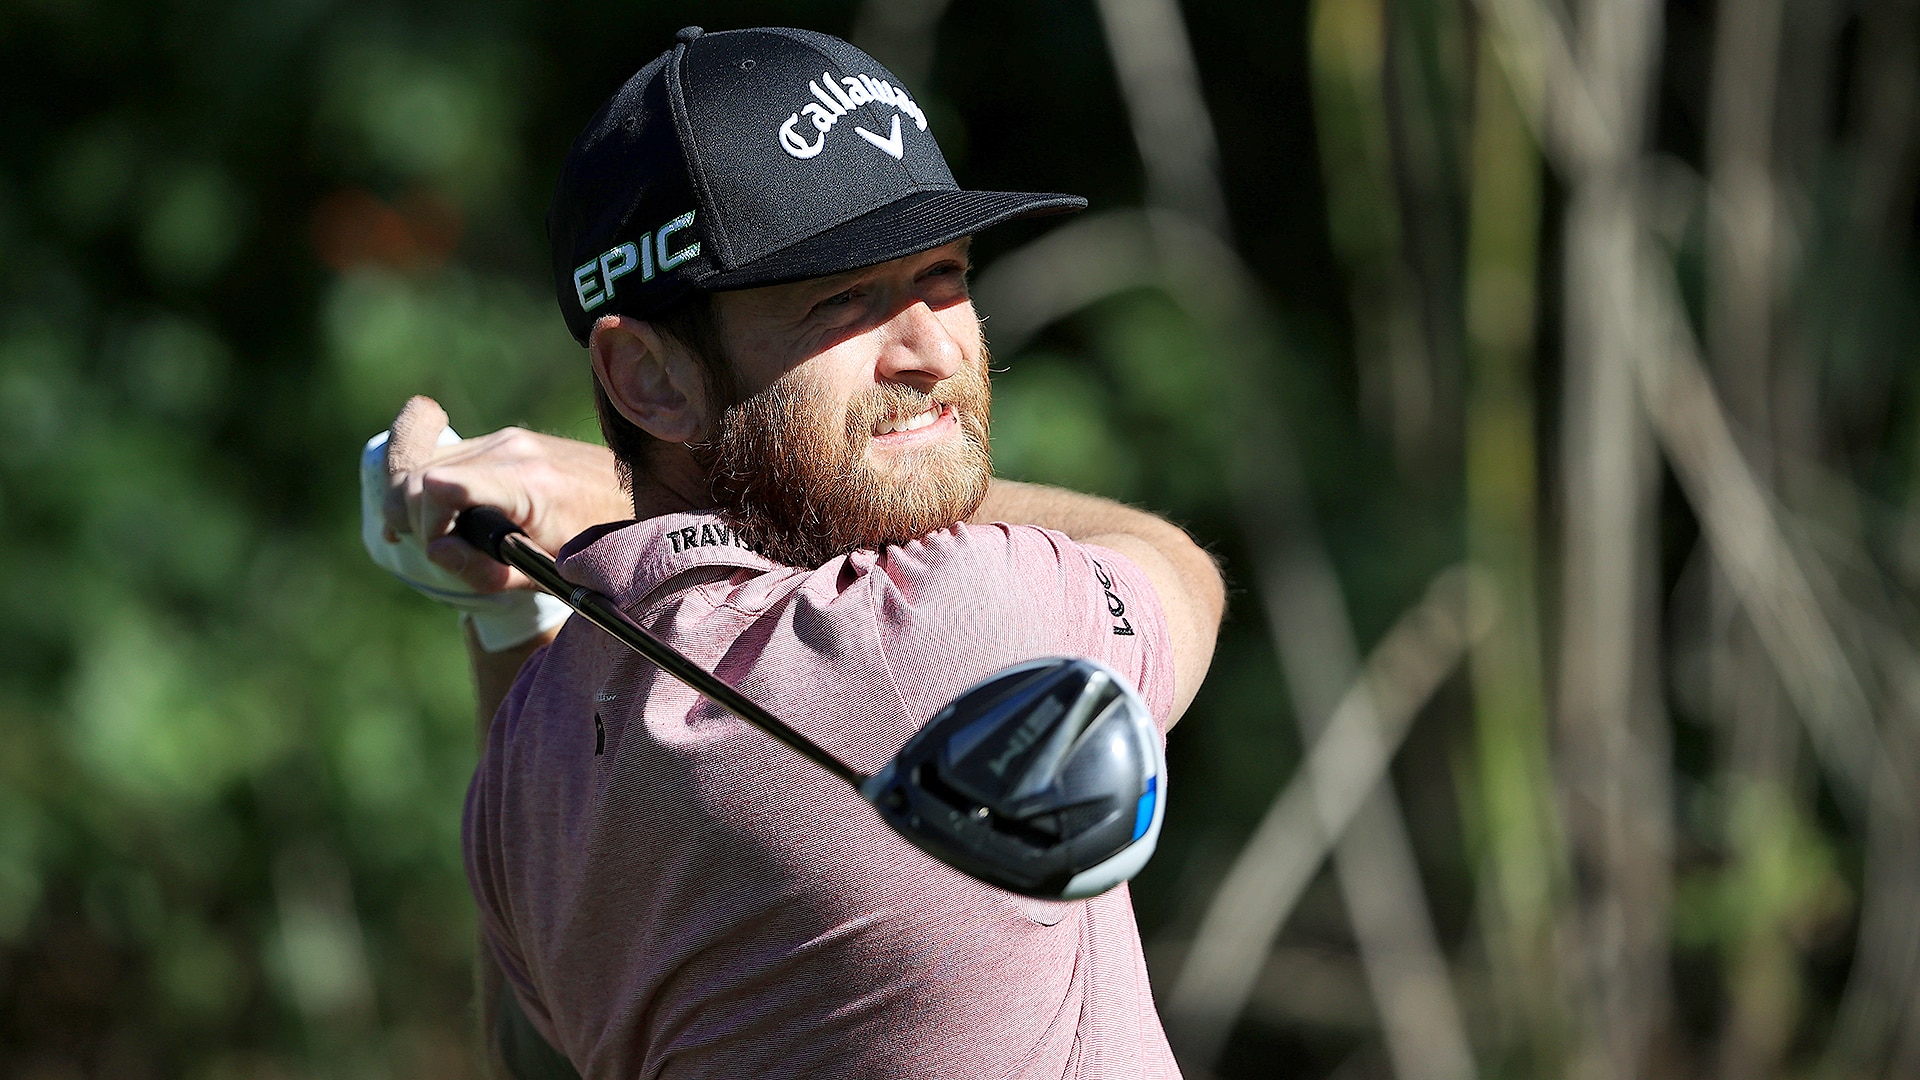 After emergency surgery to remove fingernail, Tyler McCumber goes bogey-free